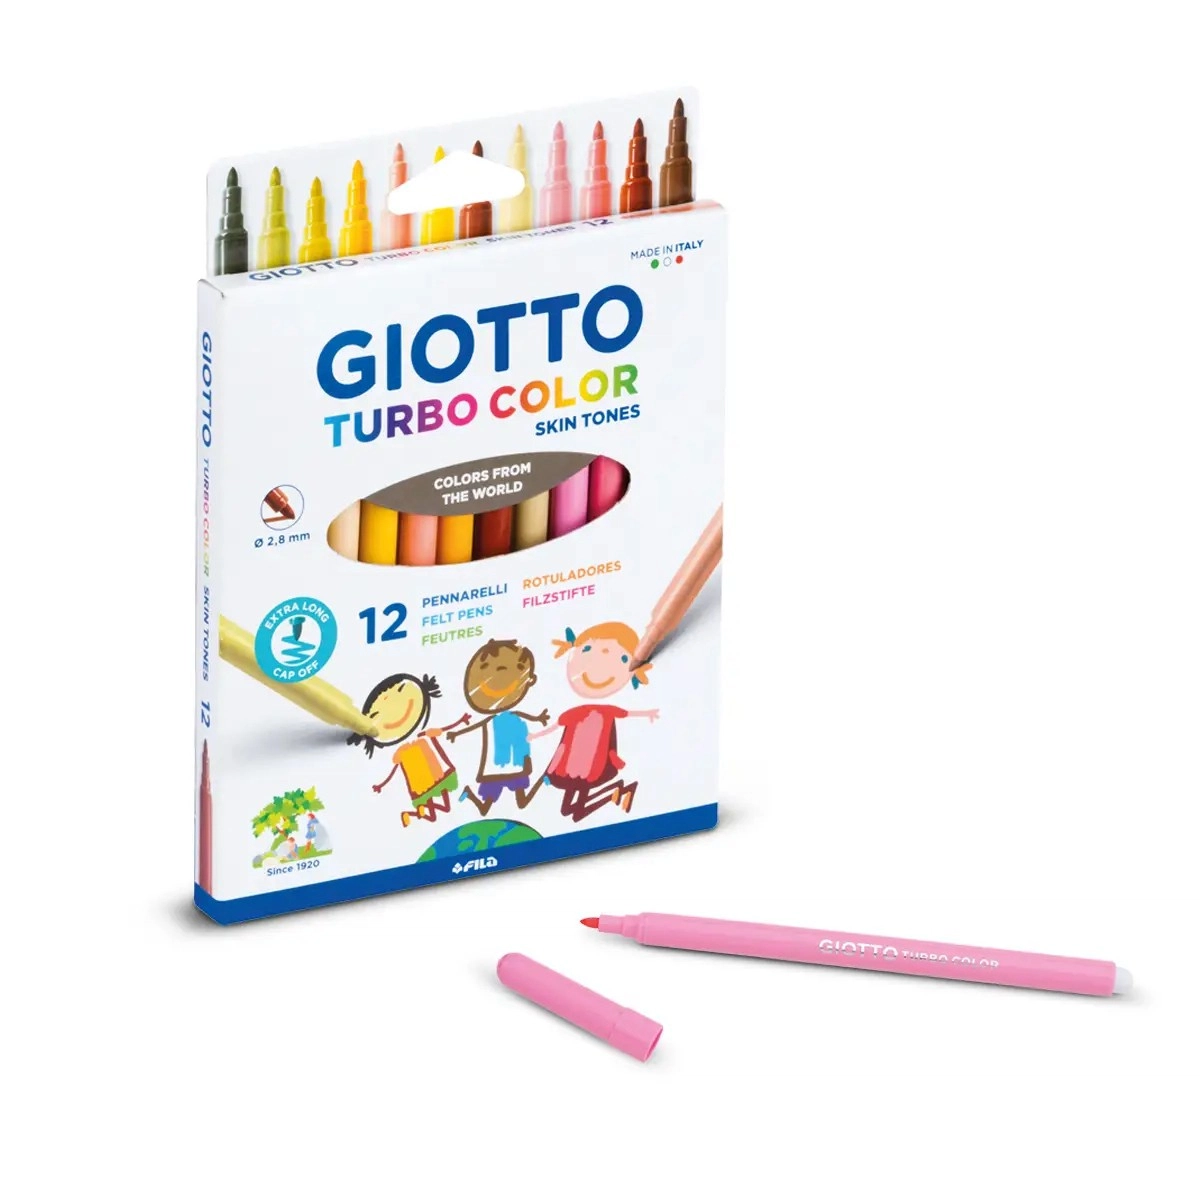 Giotto BeBe Super Large Giant Pencils and Sharpener Set - Pack of 12